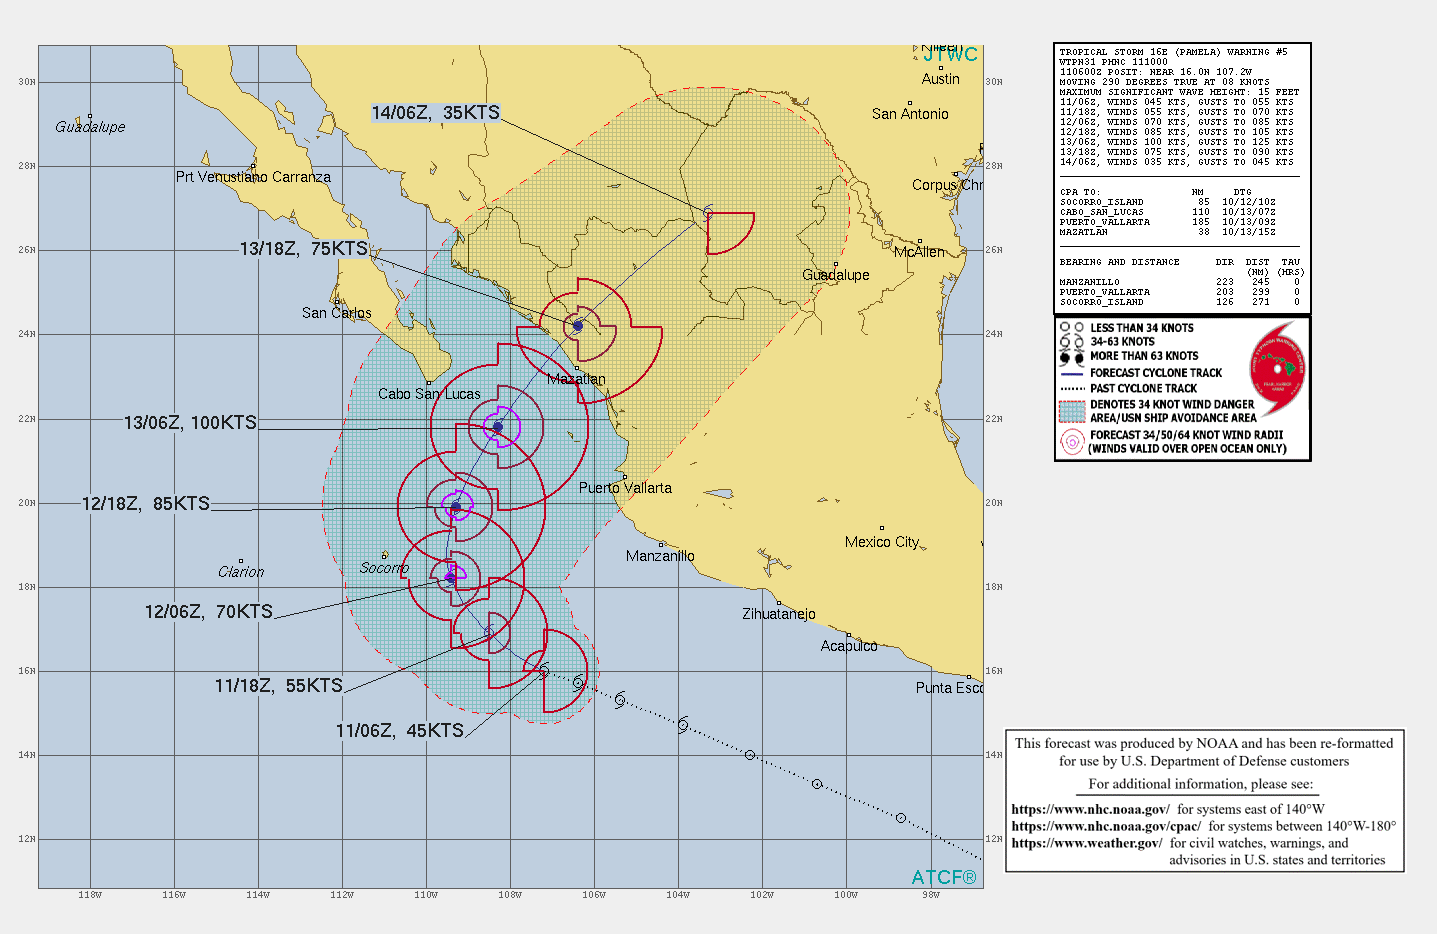 CURRENT INTENSITY IS 45KNOTS AND IS FORECAST TO PEAK AT 100KNOTS/CAT 3 BY 13/06UTC.